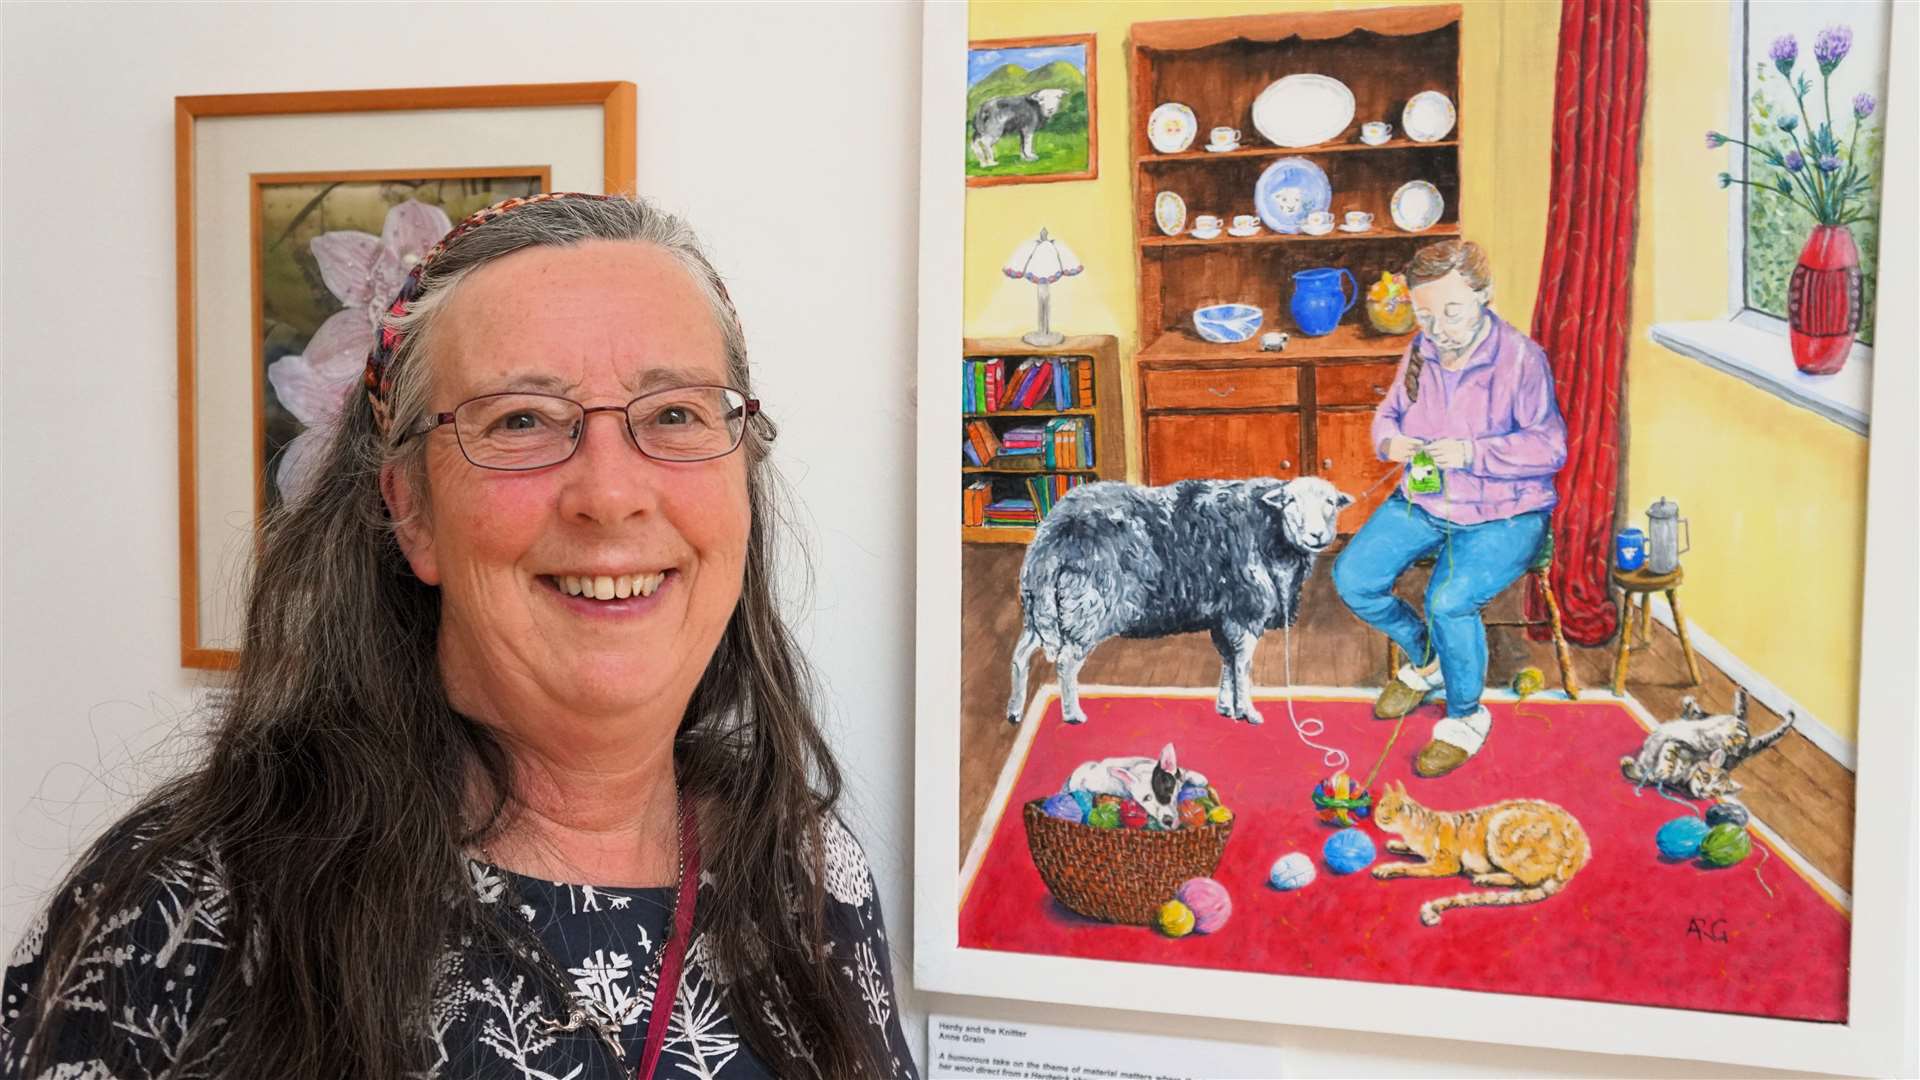 Anne Grain with Herdy and the Knitter which is a humorous take on the show's theme of 'Material Matters'. Picture: DGS